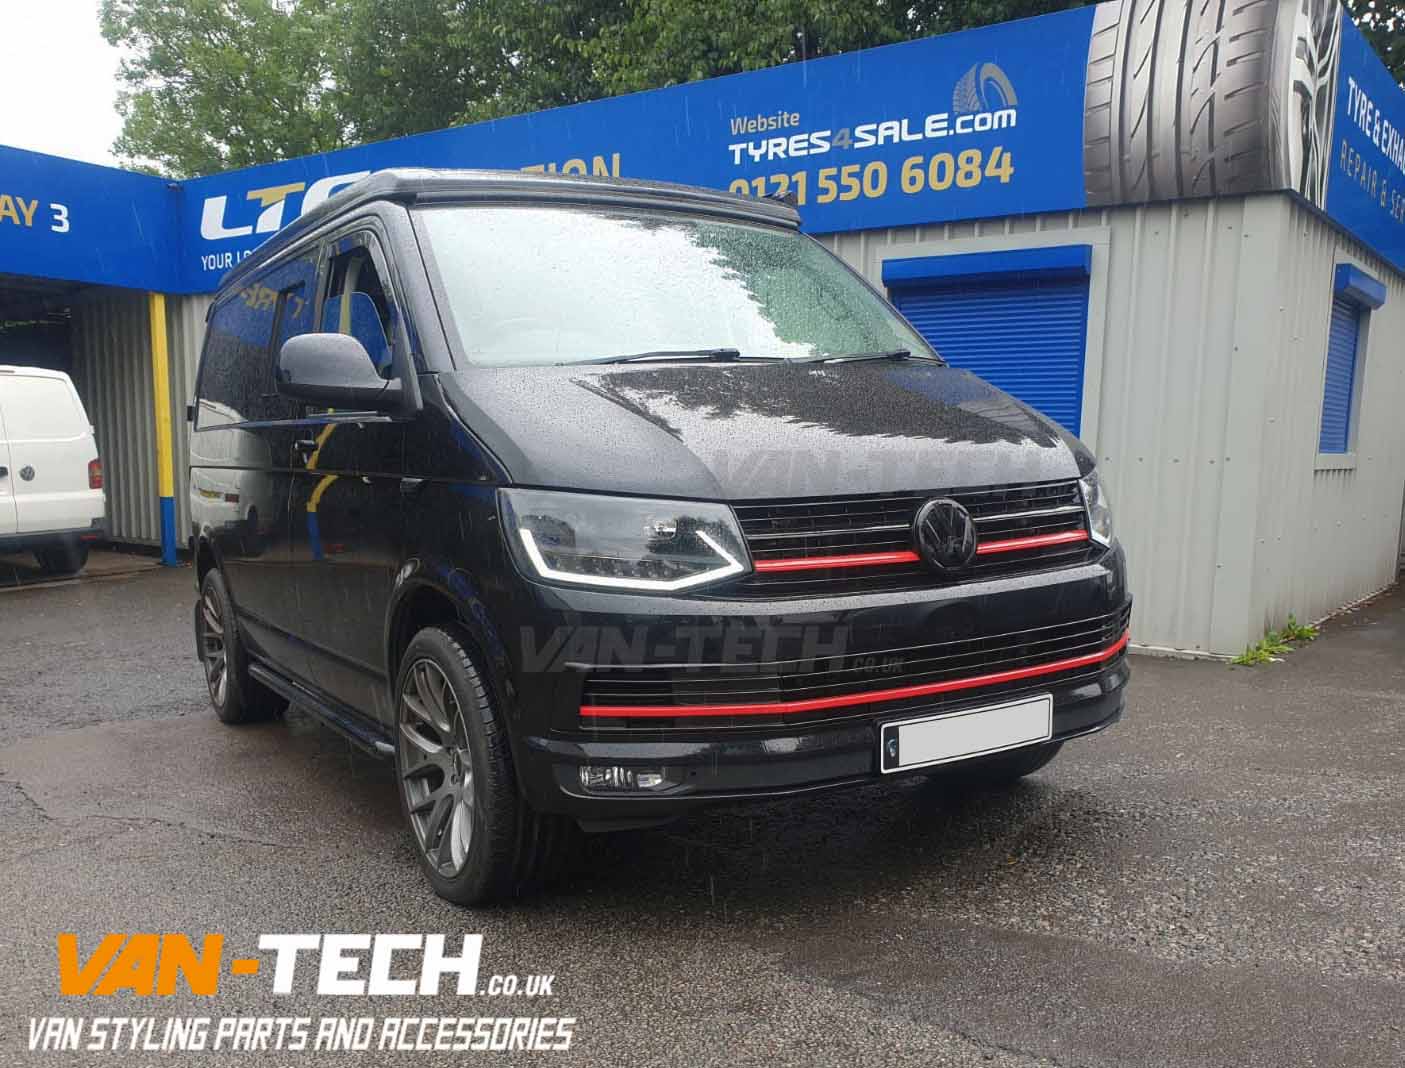 VW Transporter T6 parts and Accessories Lights, Grilles, Trim and Side Bars!